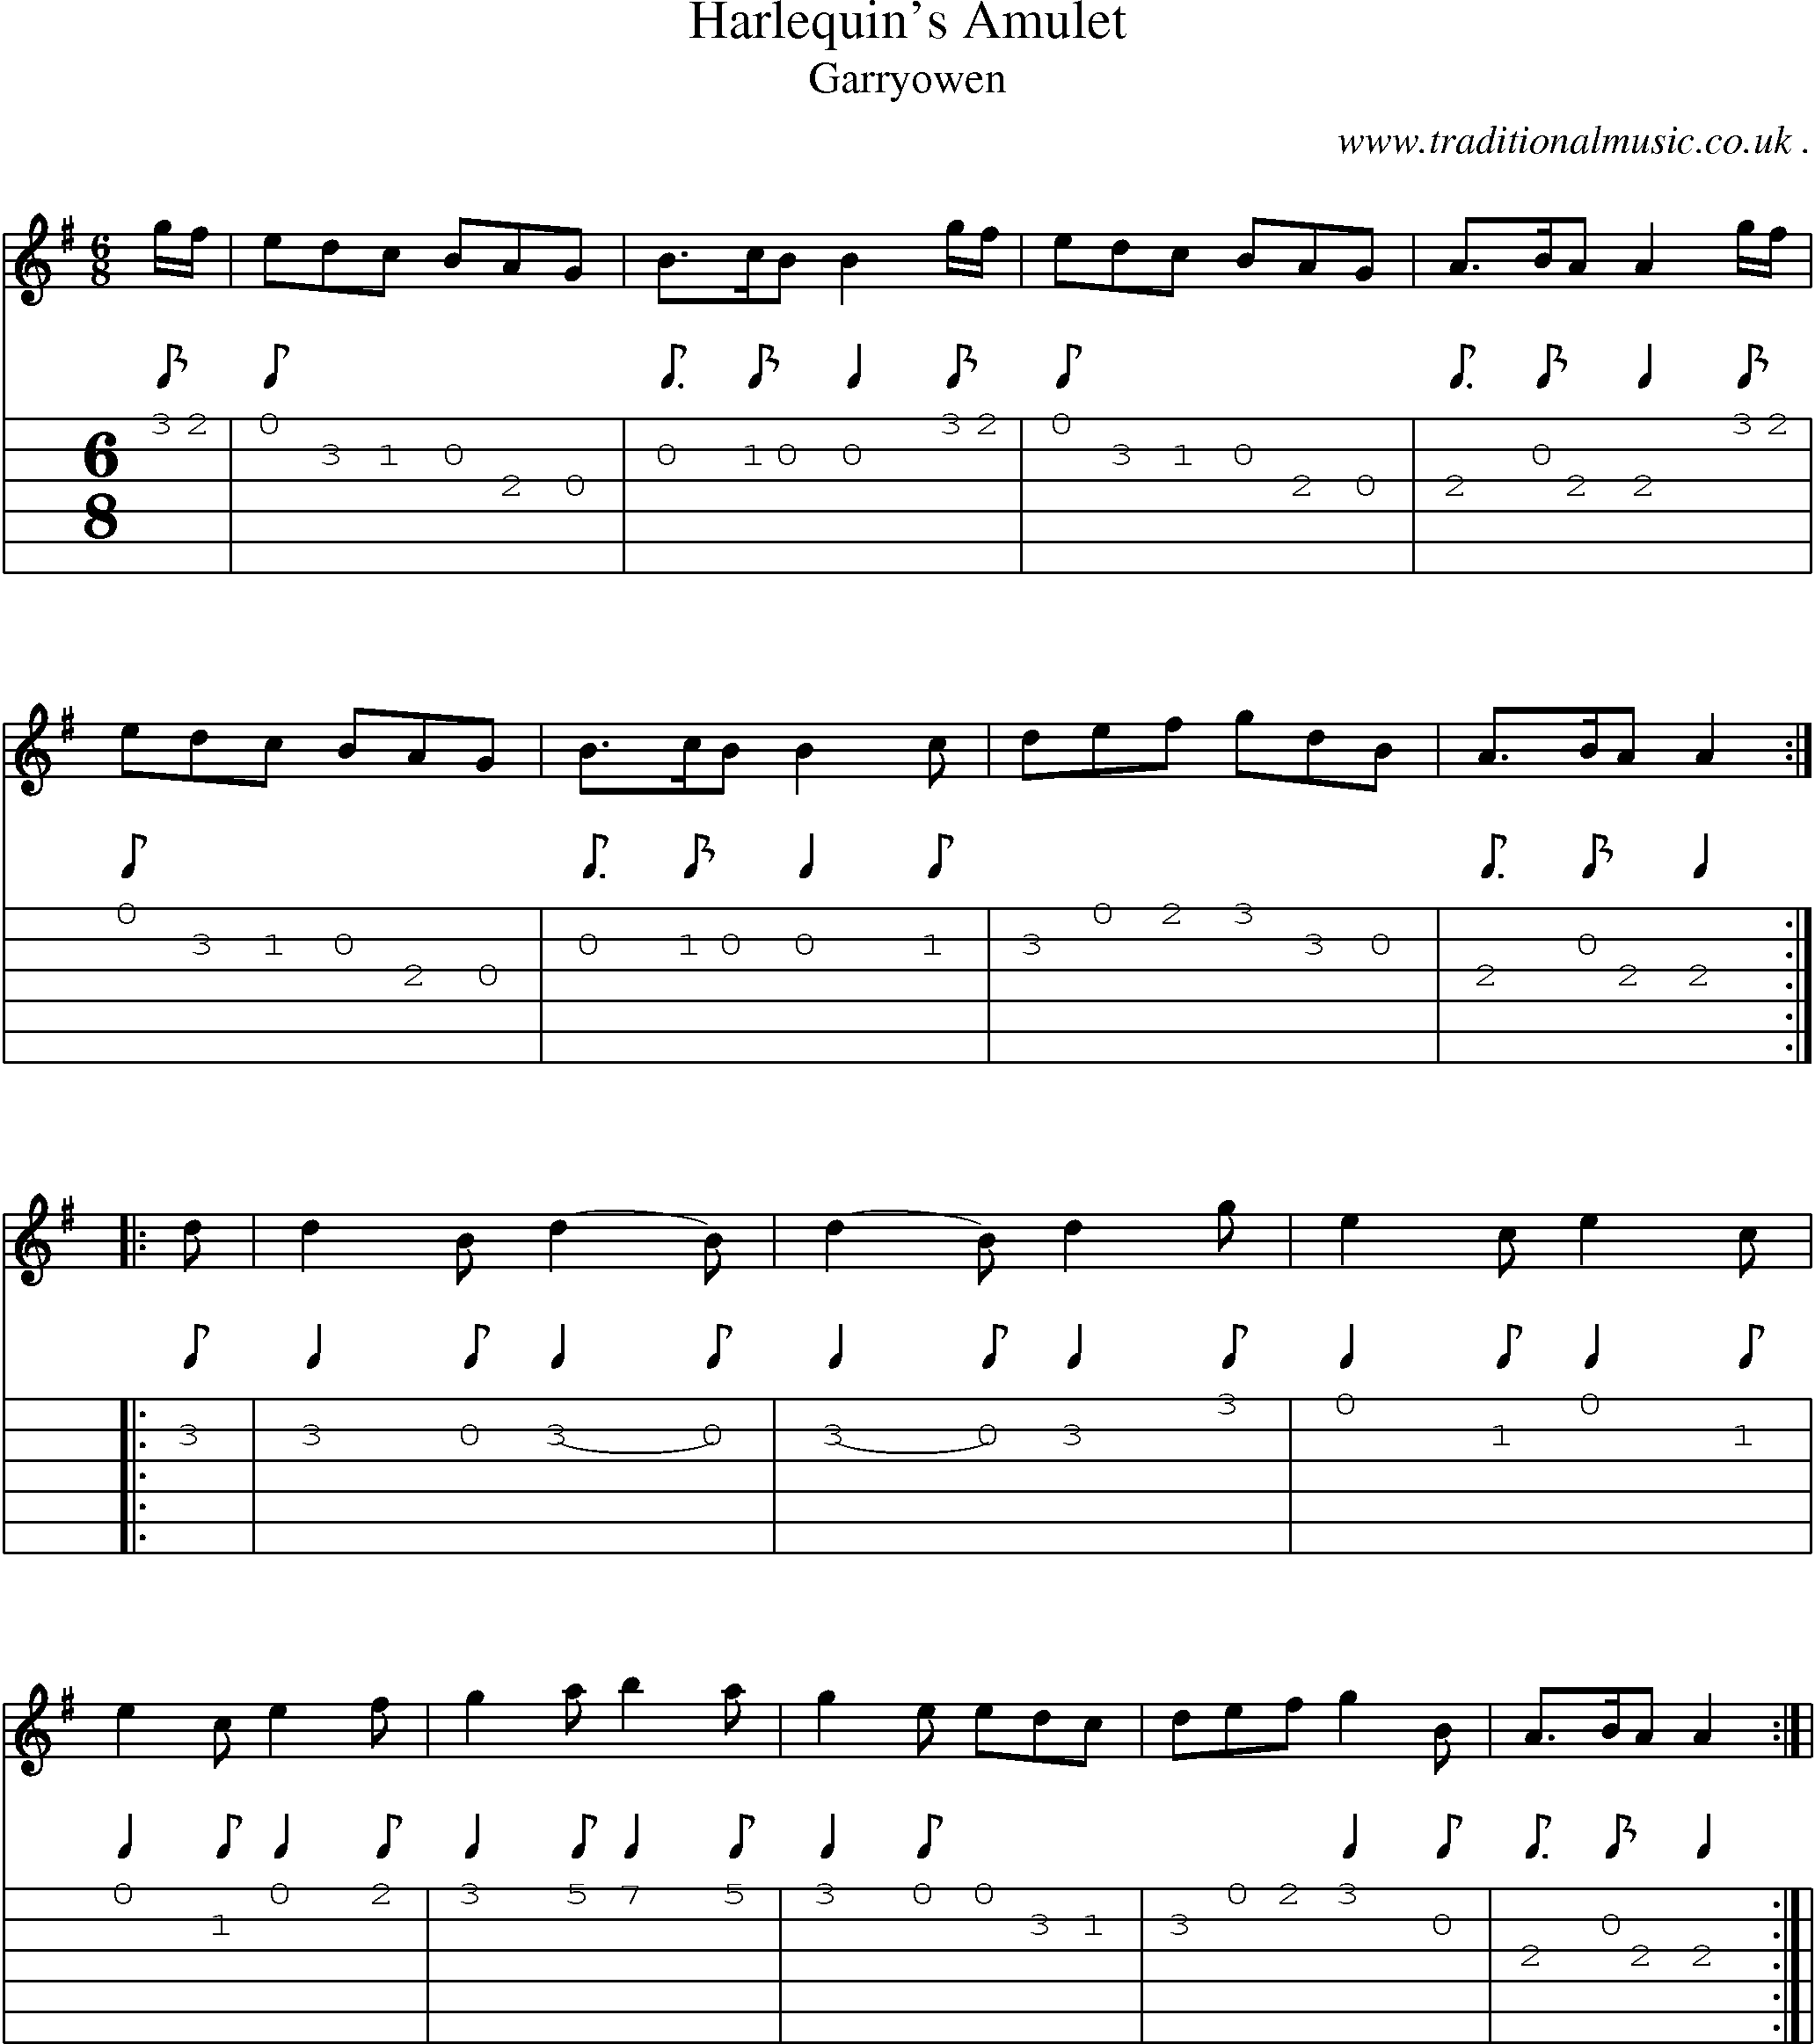 Sheet-Music and Guitar Tabs for Harlequins Amulet